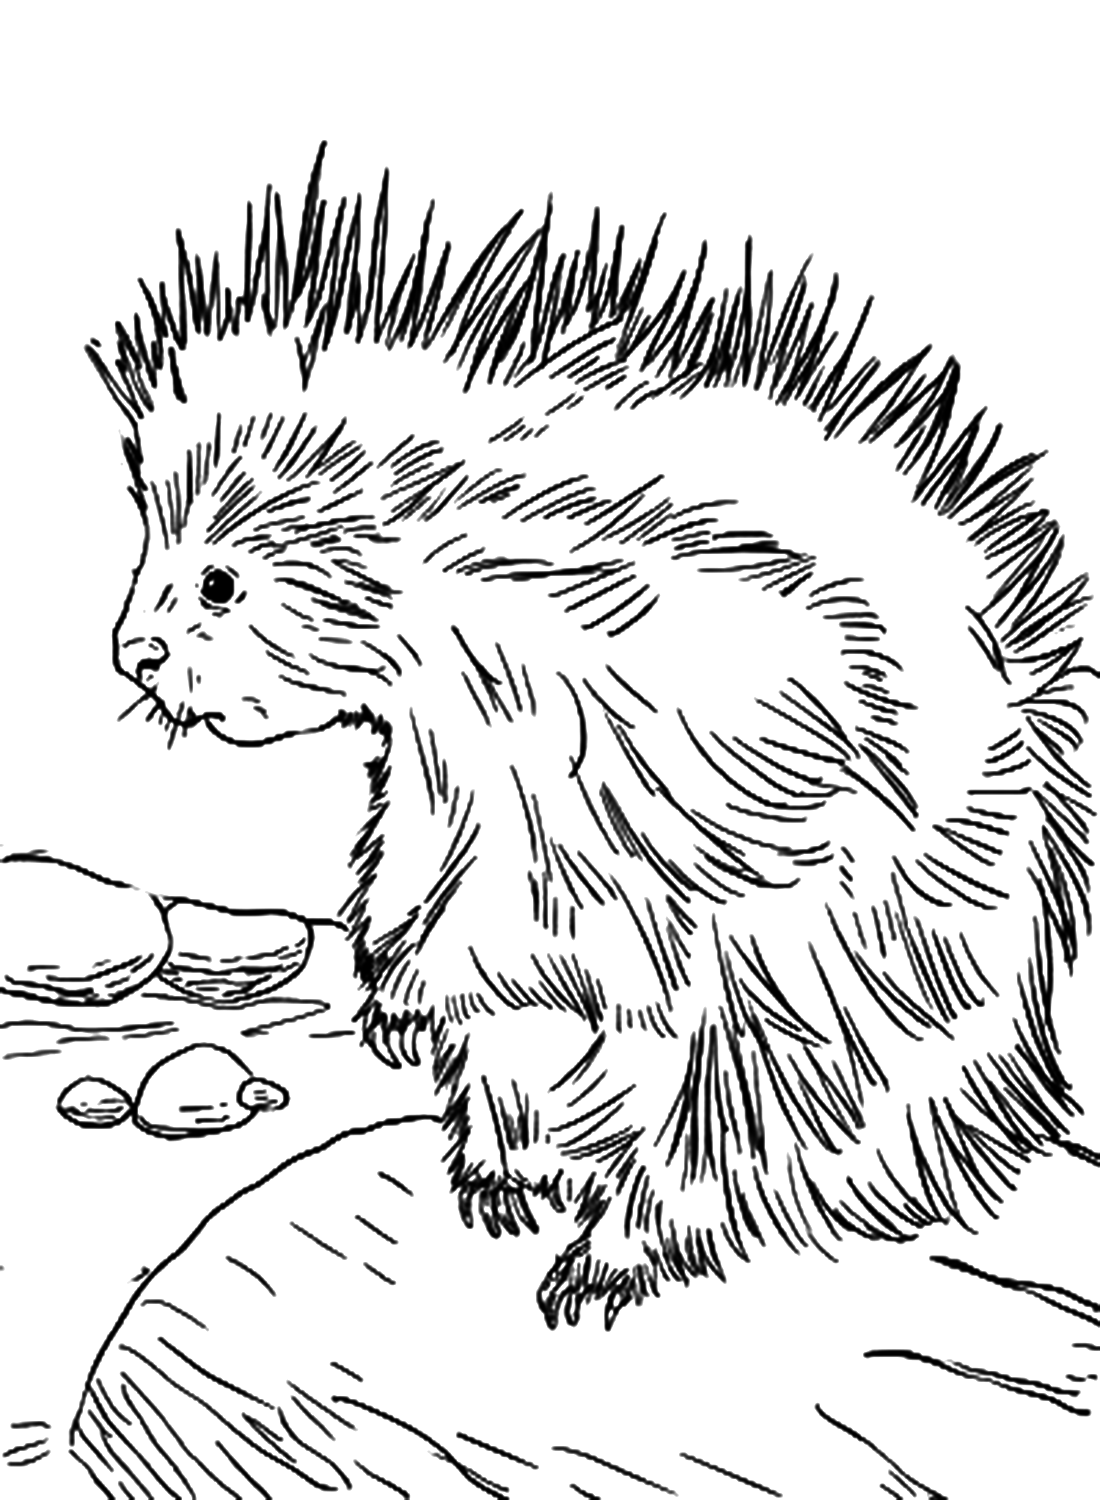 Cute Porcupine Coloring Page For Adults from Porcupine